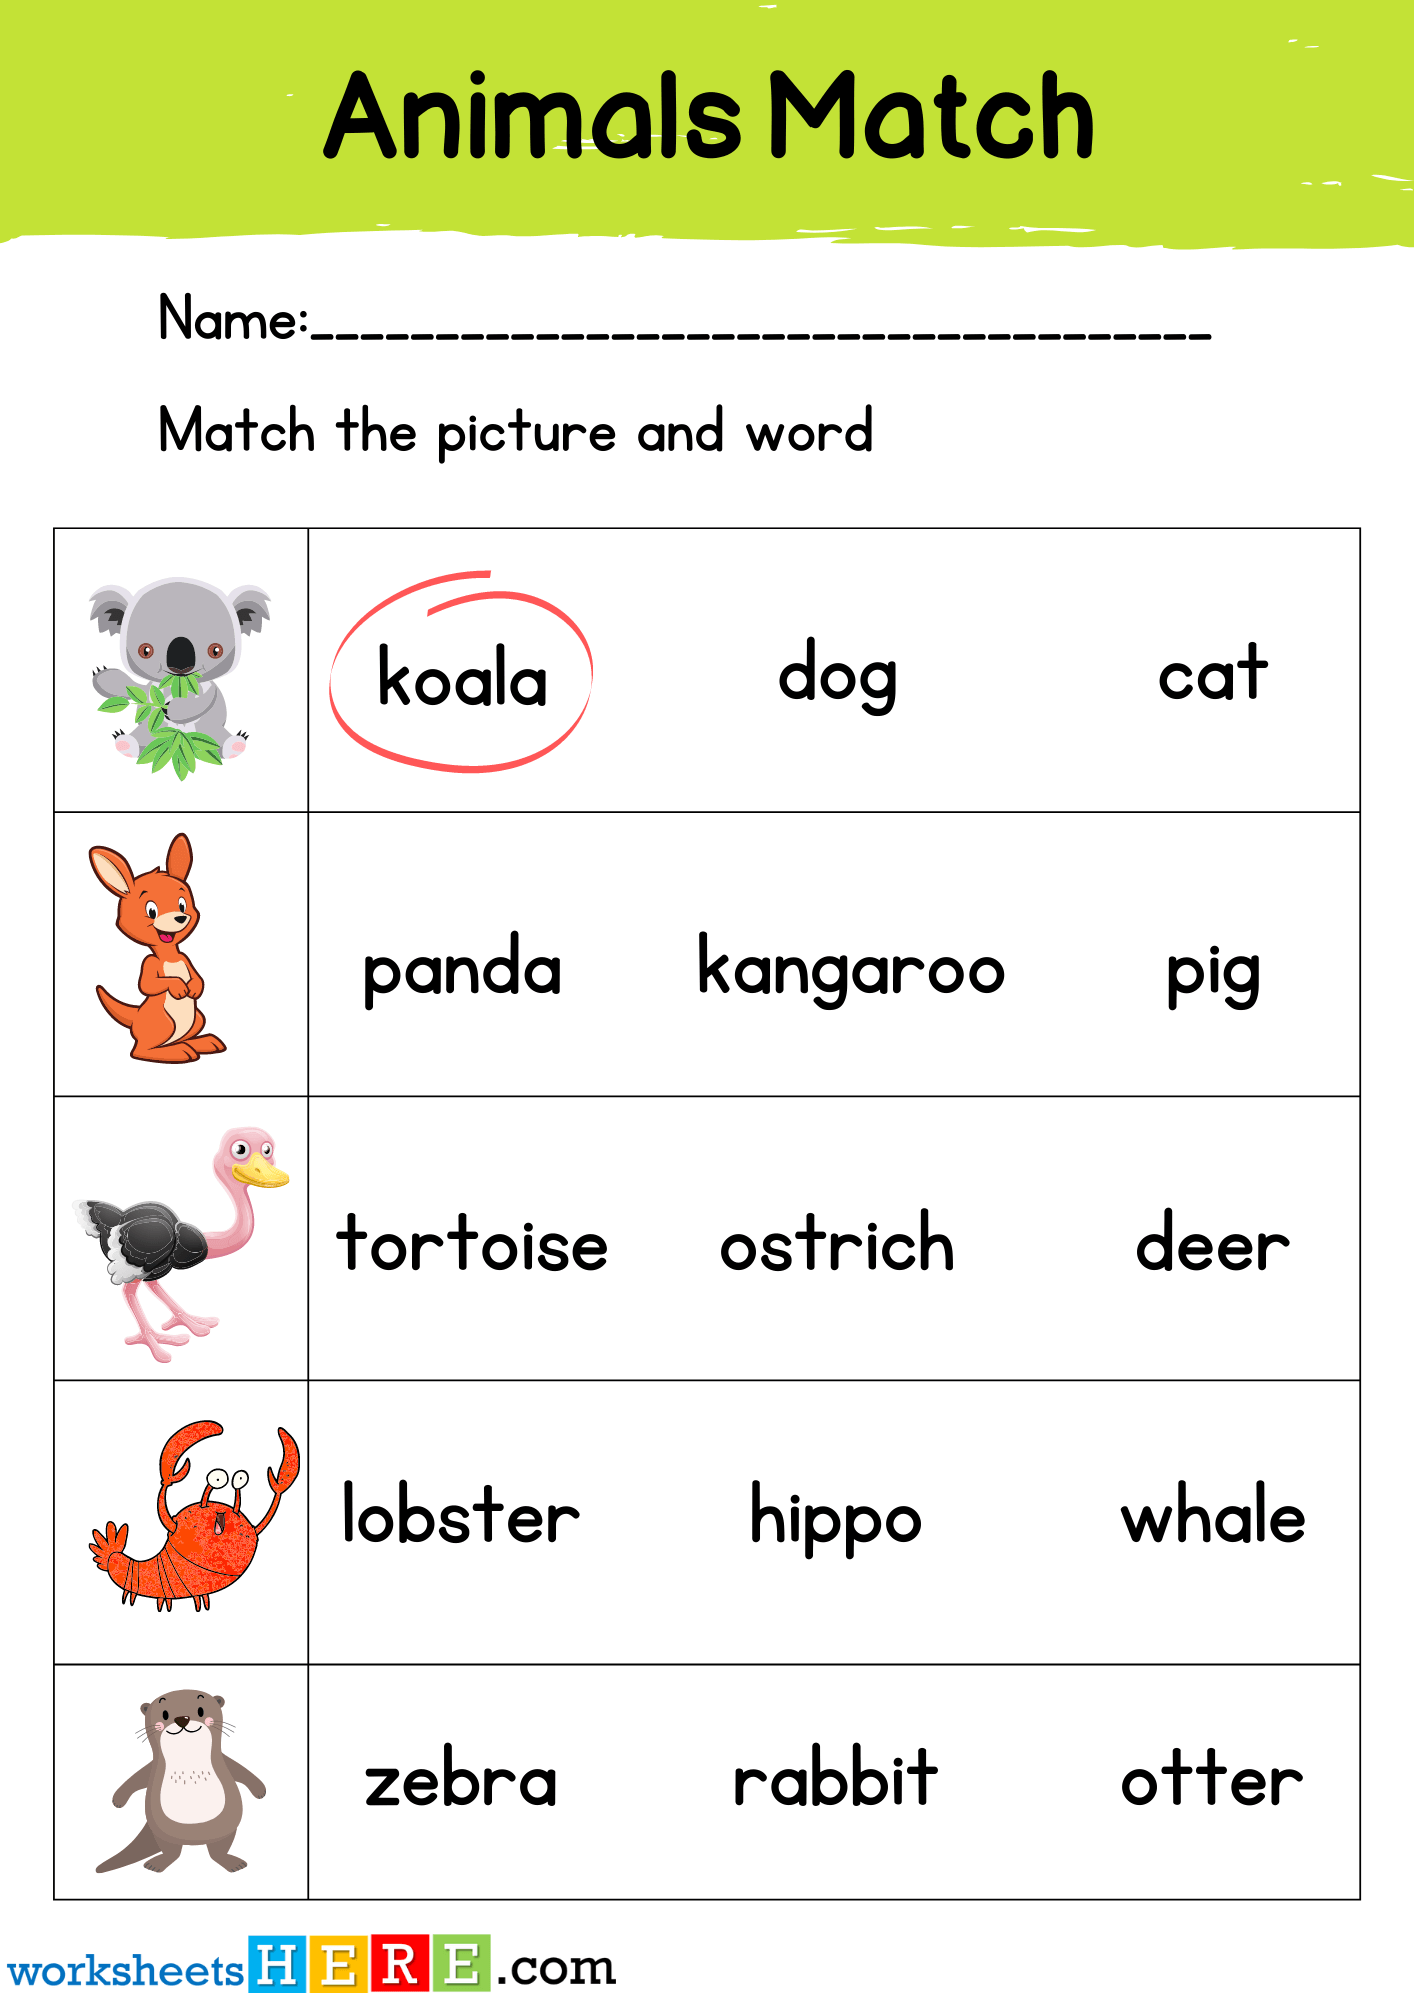 Animals Names Match with Pictures Activity PDF Worksheet For Students and Kids